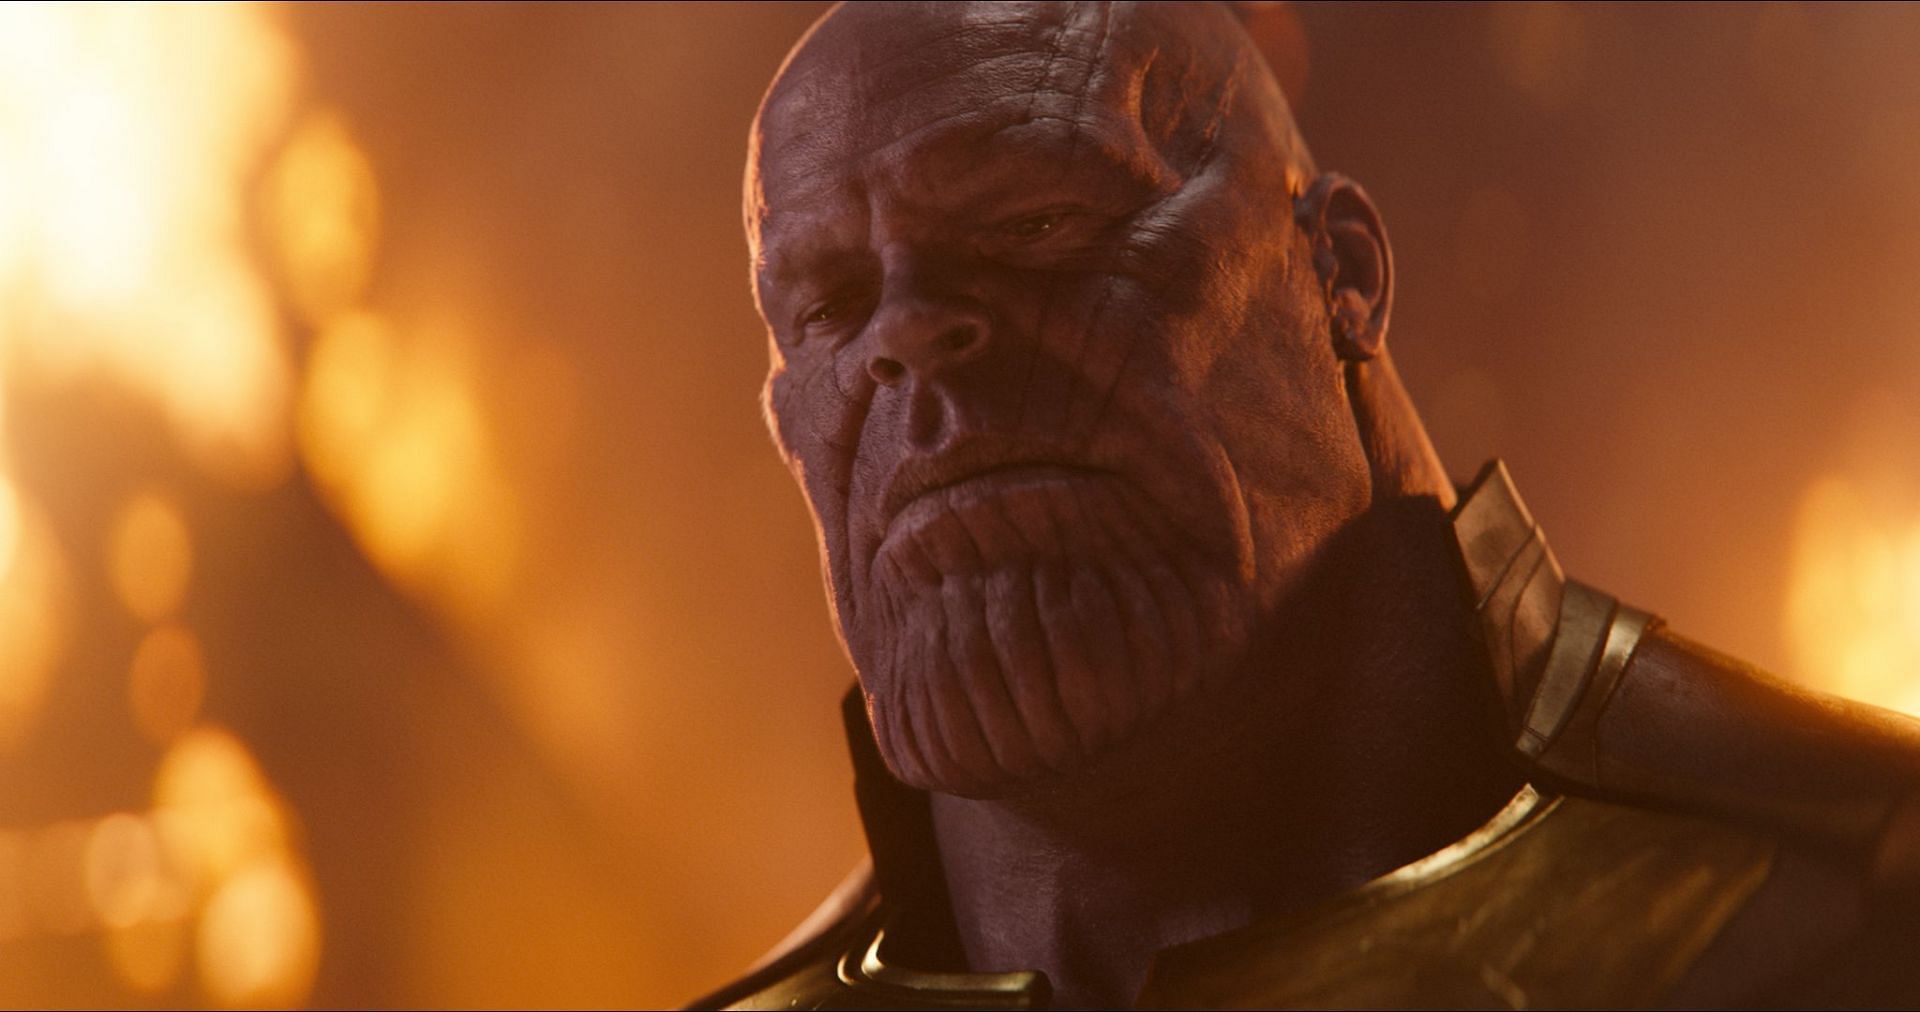 Josh Brolin&#039;s Thanos is a complex and terrifying villain who believes he is doing the right thing, even if it means sacrificing everything (Image via Marvel Studios)